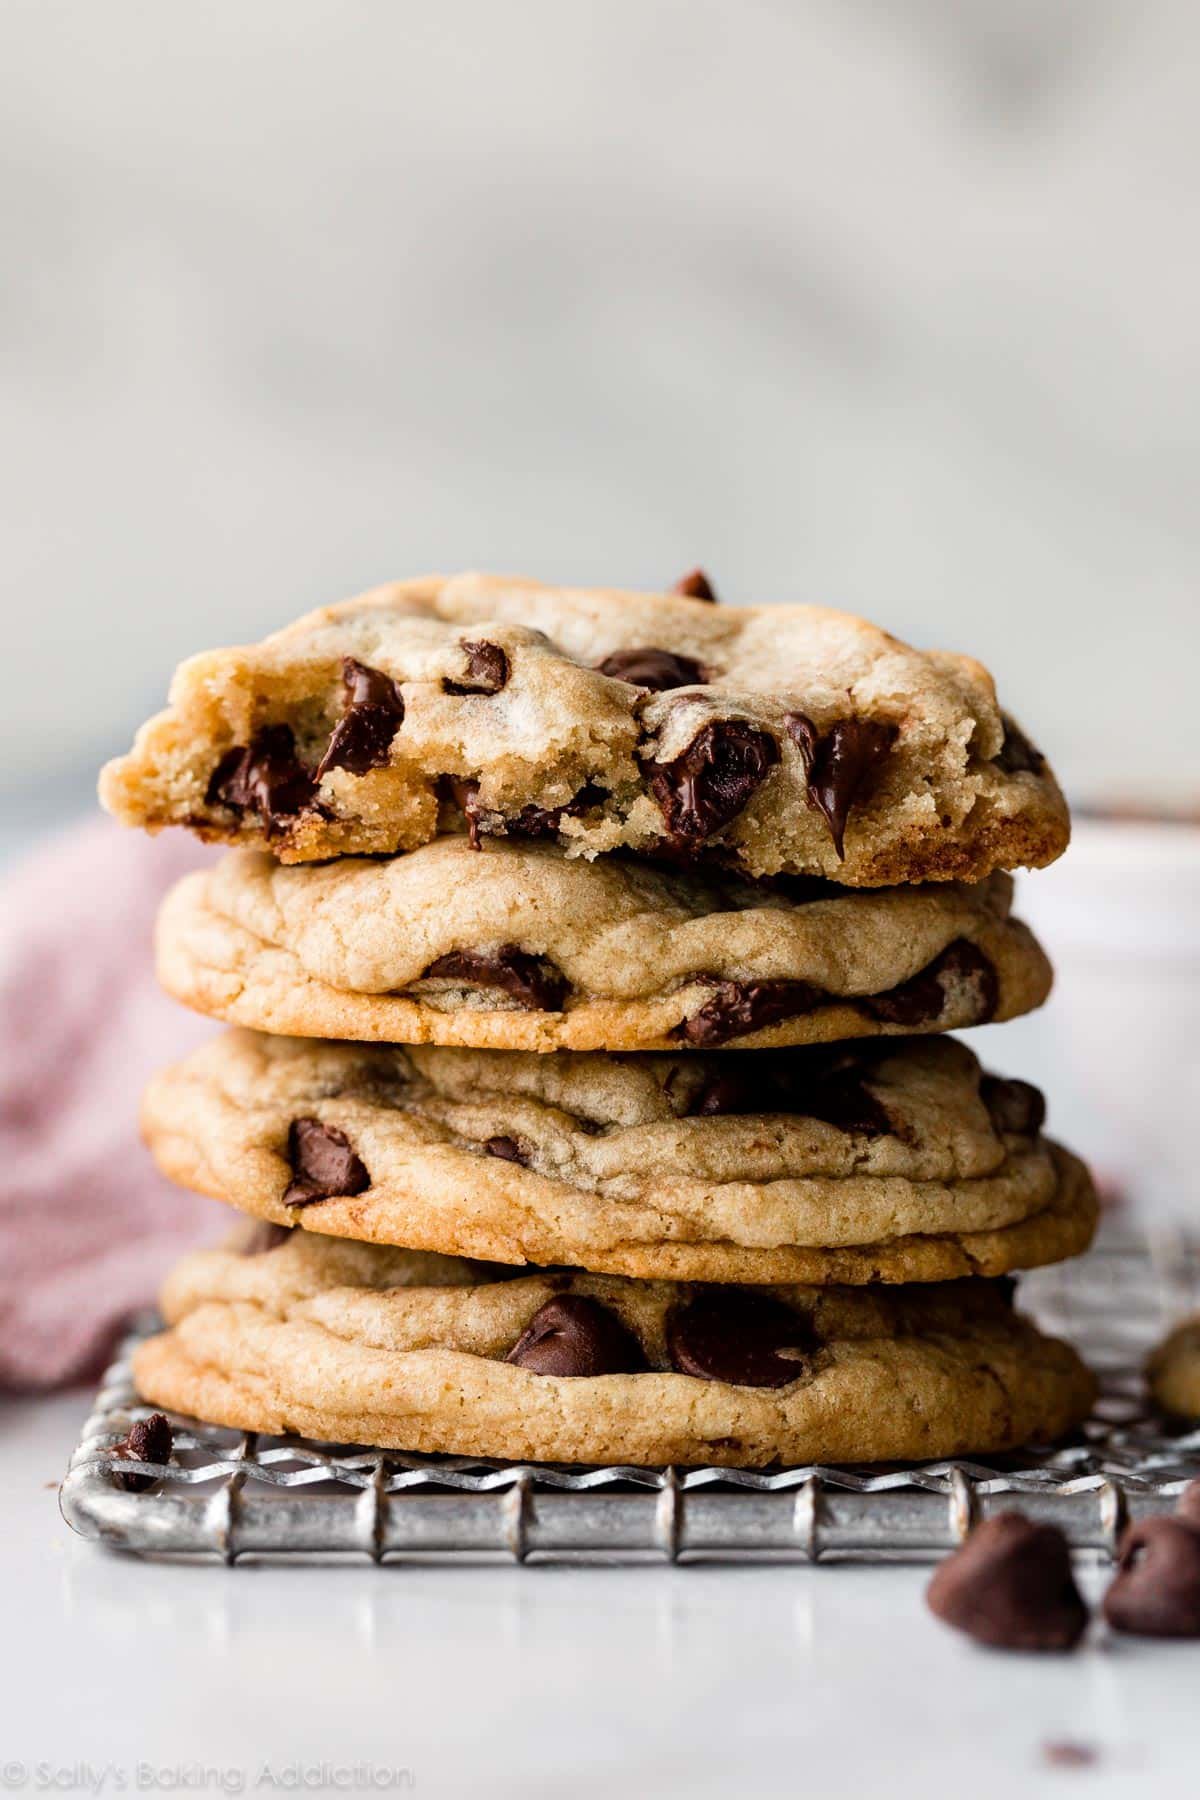 A stack of 4 chocolate chip cookies with the top biscuit cut in half